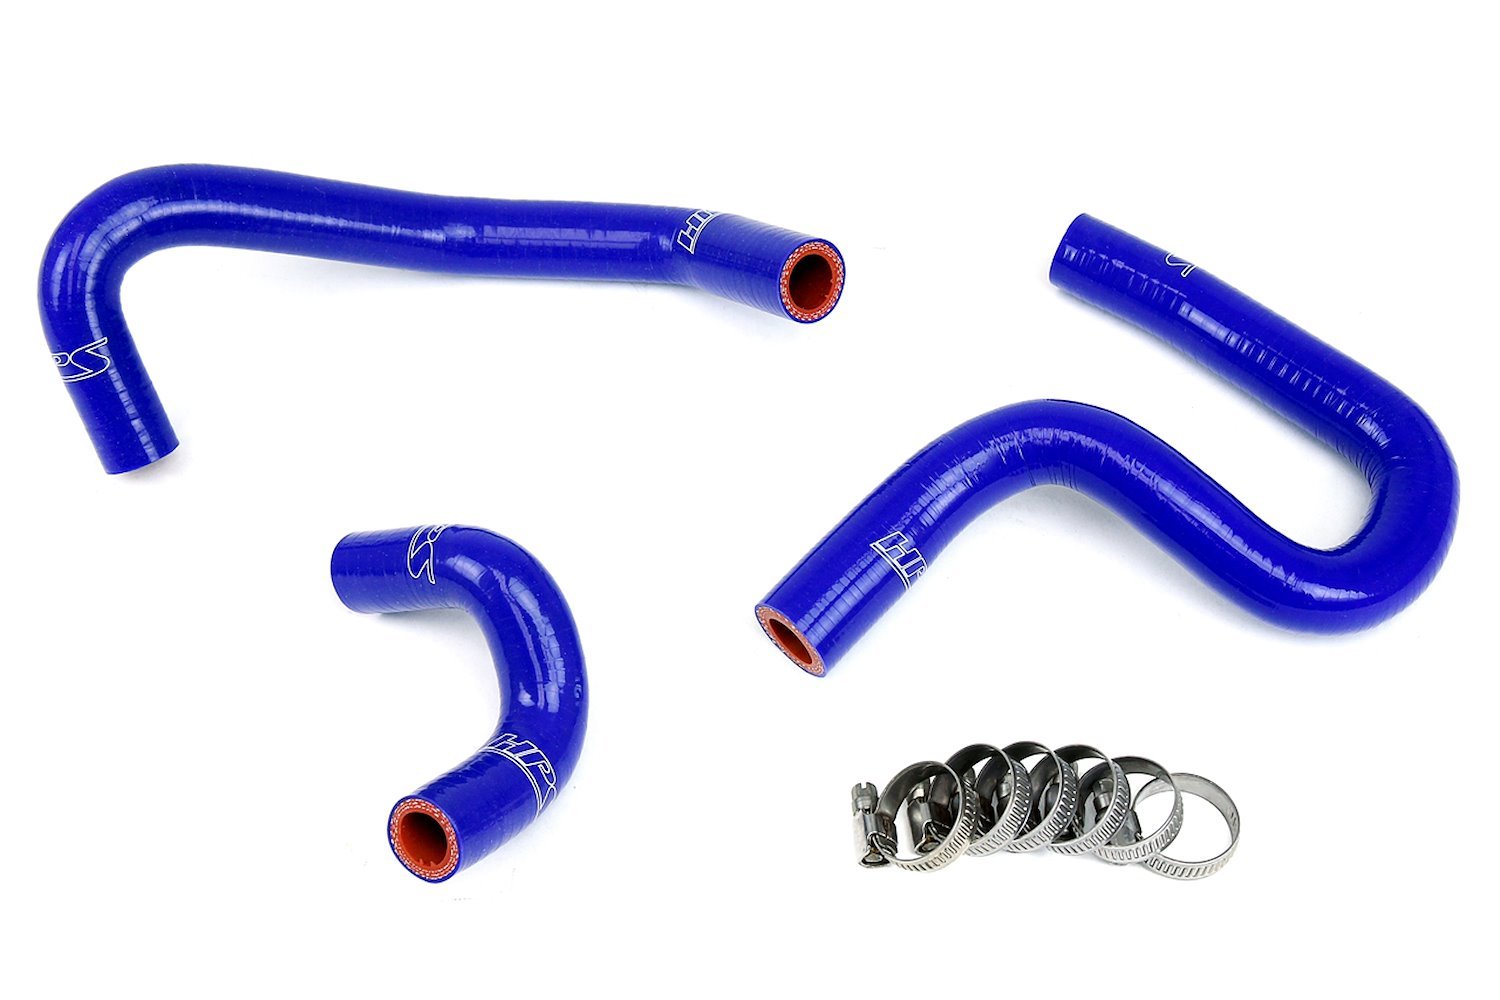 57-1763-BLUE Heater Hose Kit, 3-Ply Reinforced Silicone, Replaces Rubber Heater Coolant Hoses